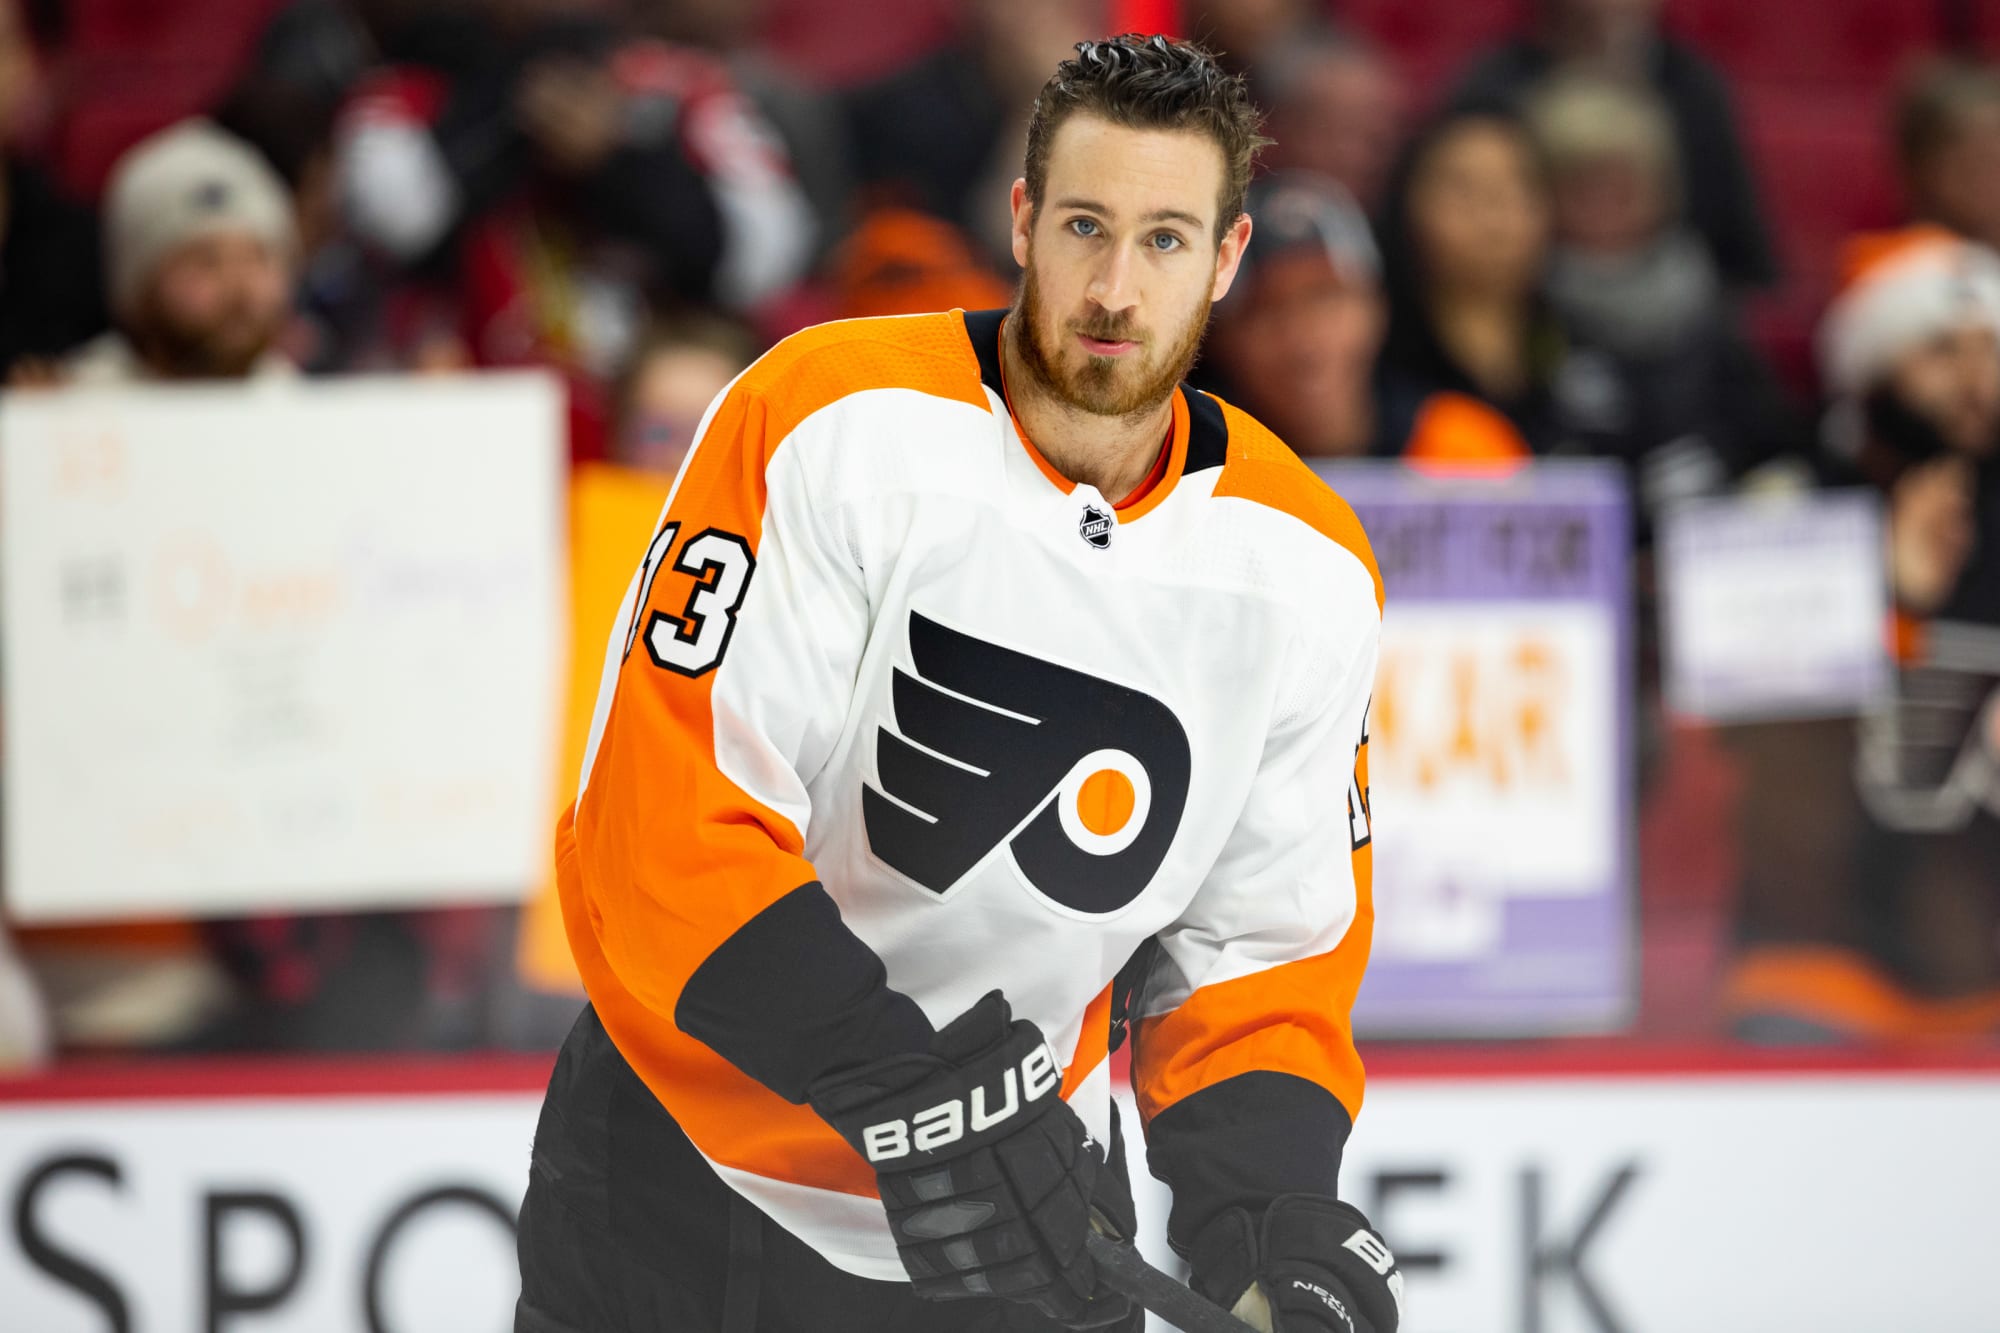 Flyers vs Rangers Bettings Odds, Projected Lines, Offense On Fire